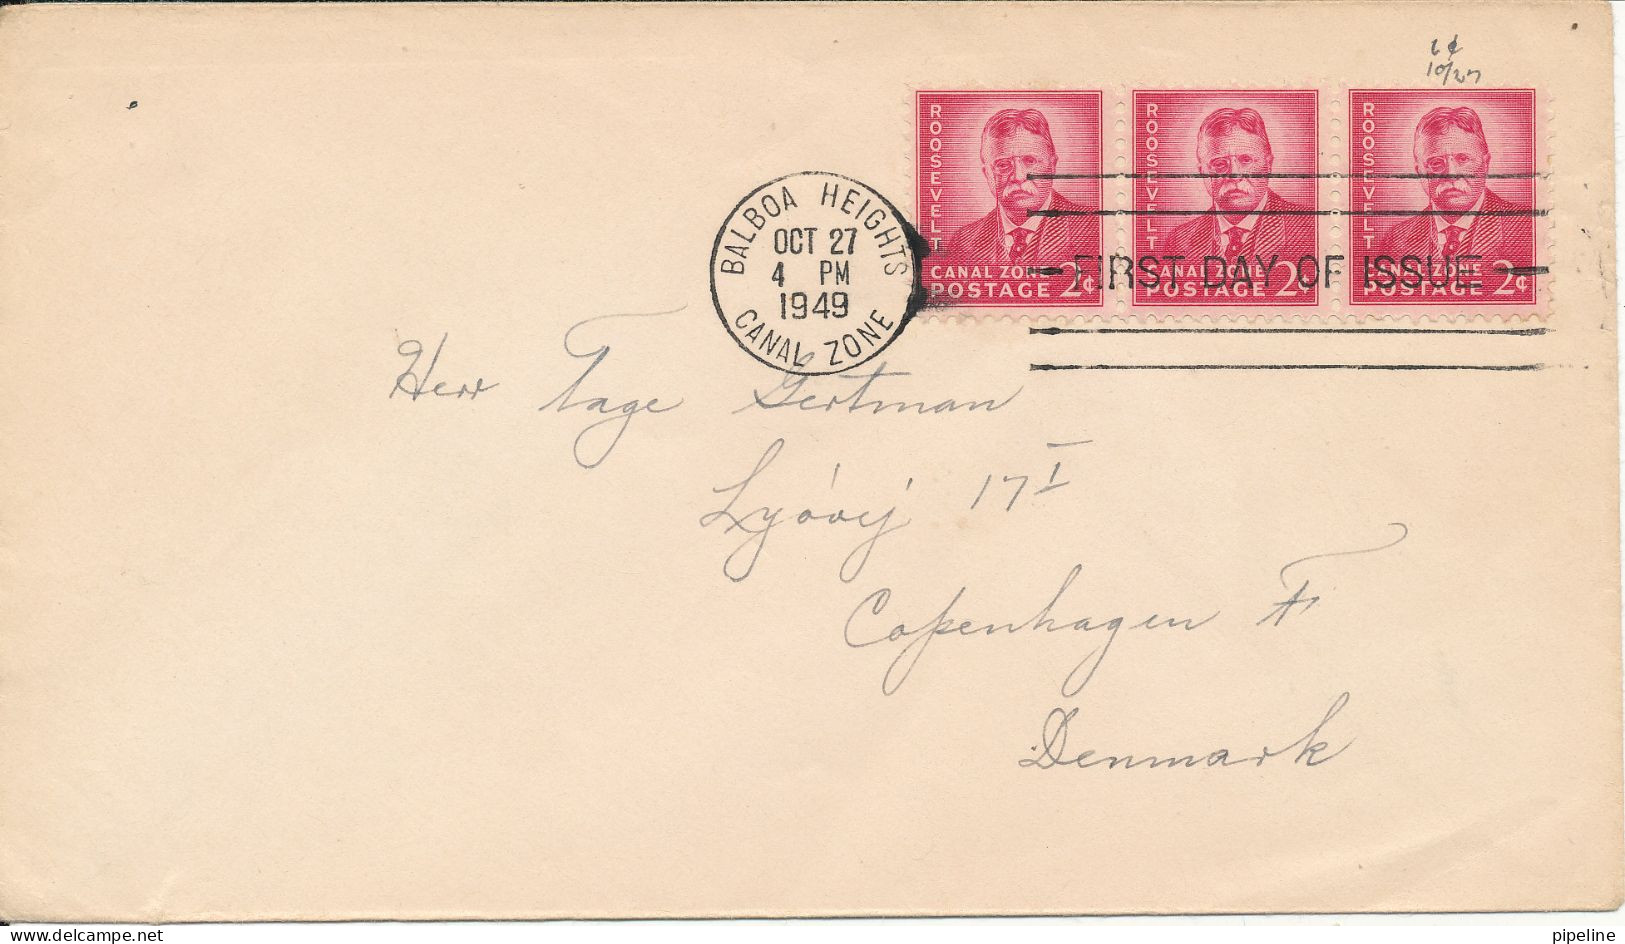 Canal Zone FDC Theodore Roosevelt 27-10-1949 - Canal Zone